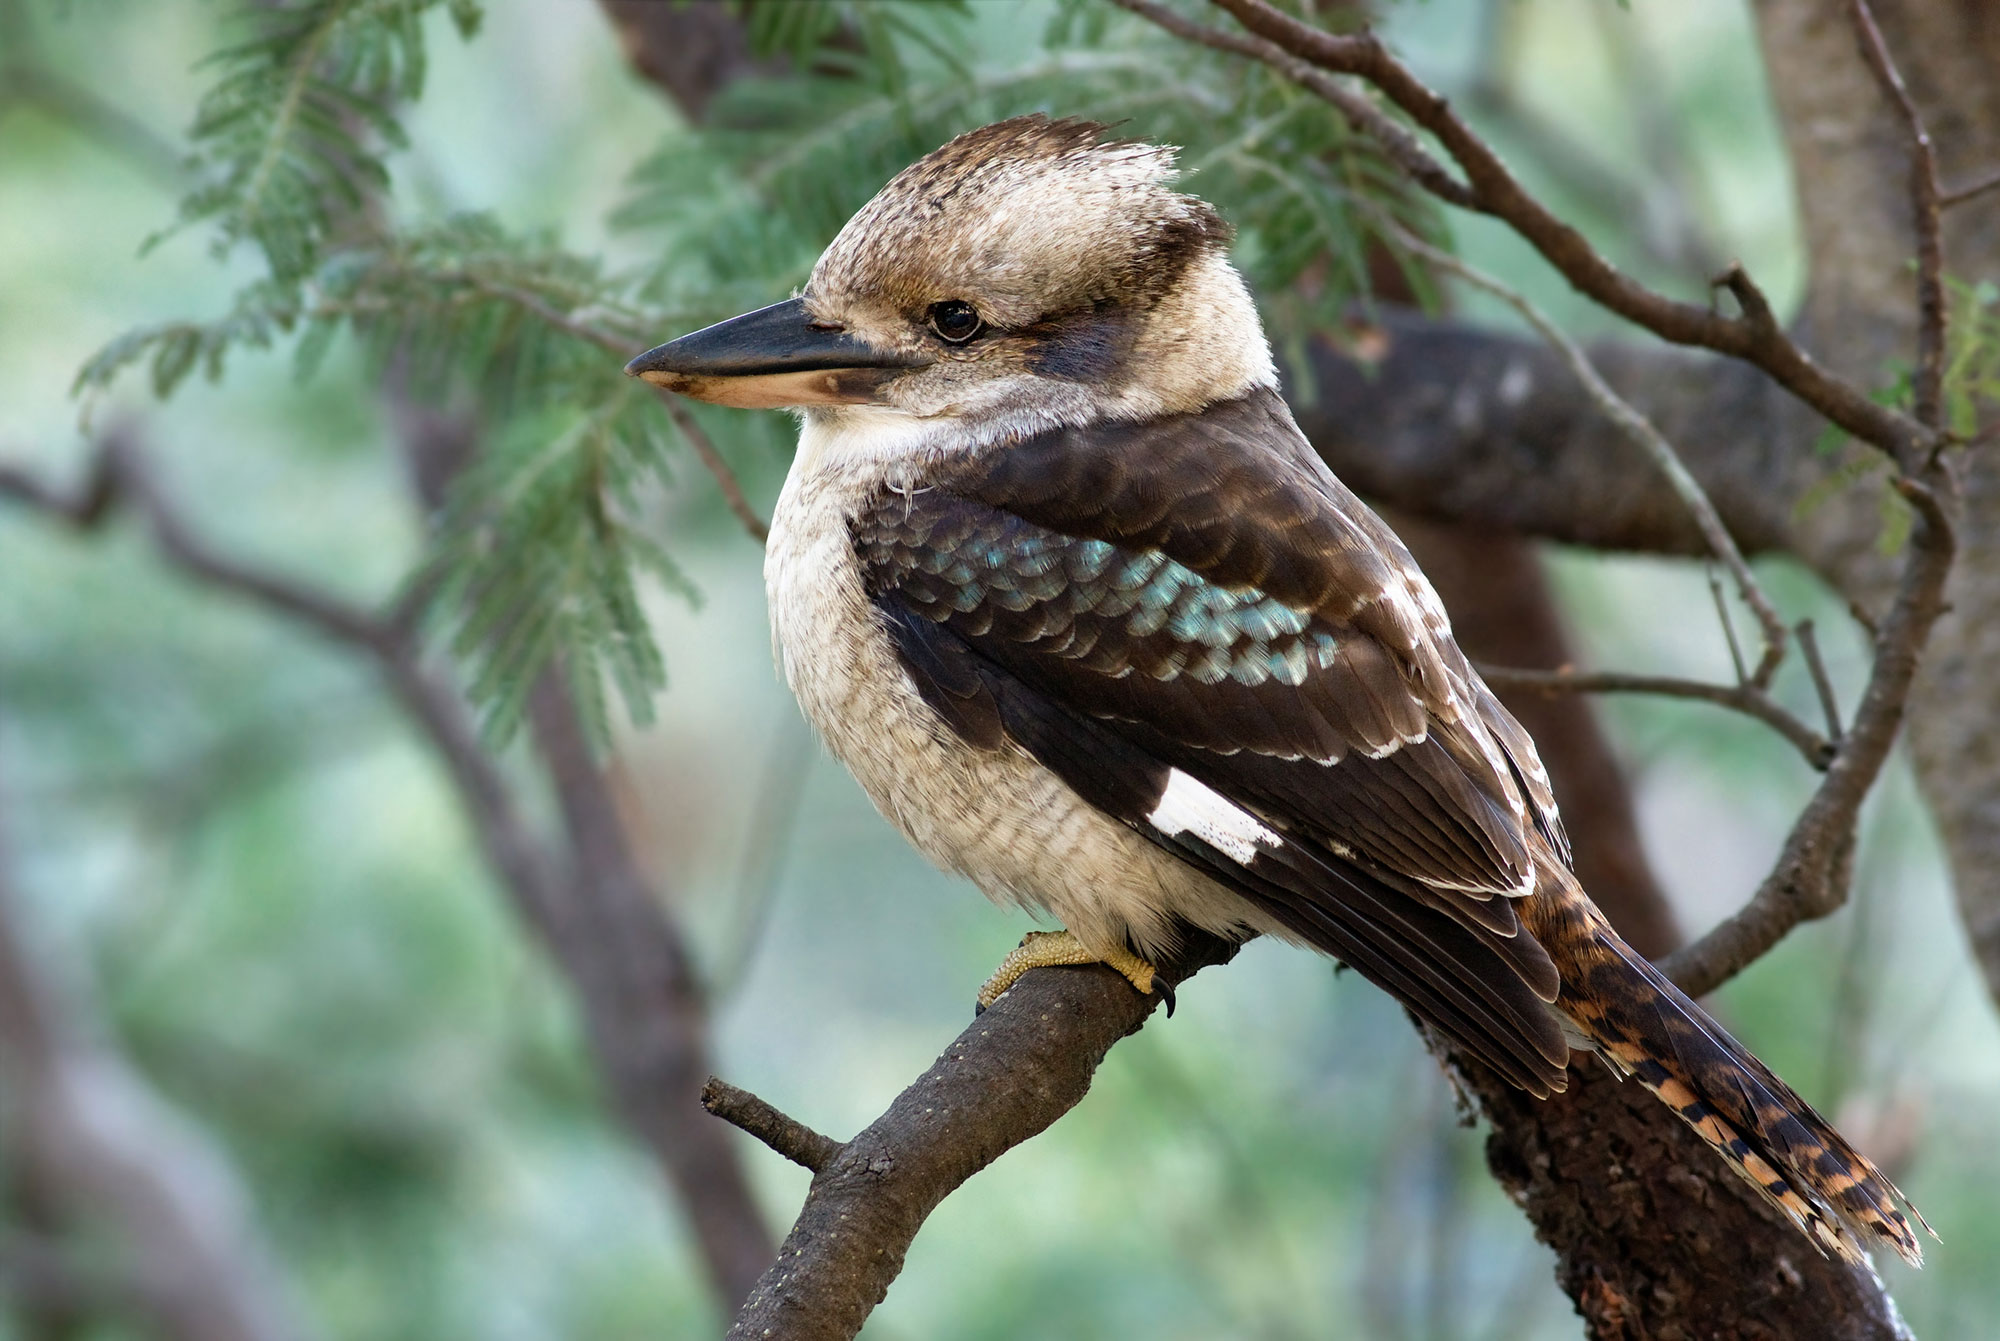 Photograph of a laughing kookaburra sitting on a thick tree branch. The photo shows a large off-white and black bird with a large head and a large beak. The bird's head and breast is mostly off-white with brown speckles. Its back and tail are mostly dark brown to black, with some blue-green on the wings.